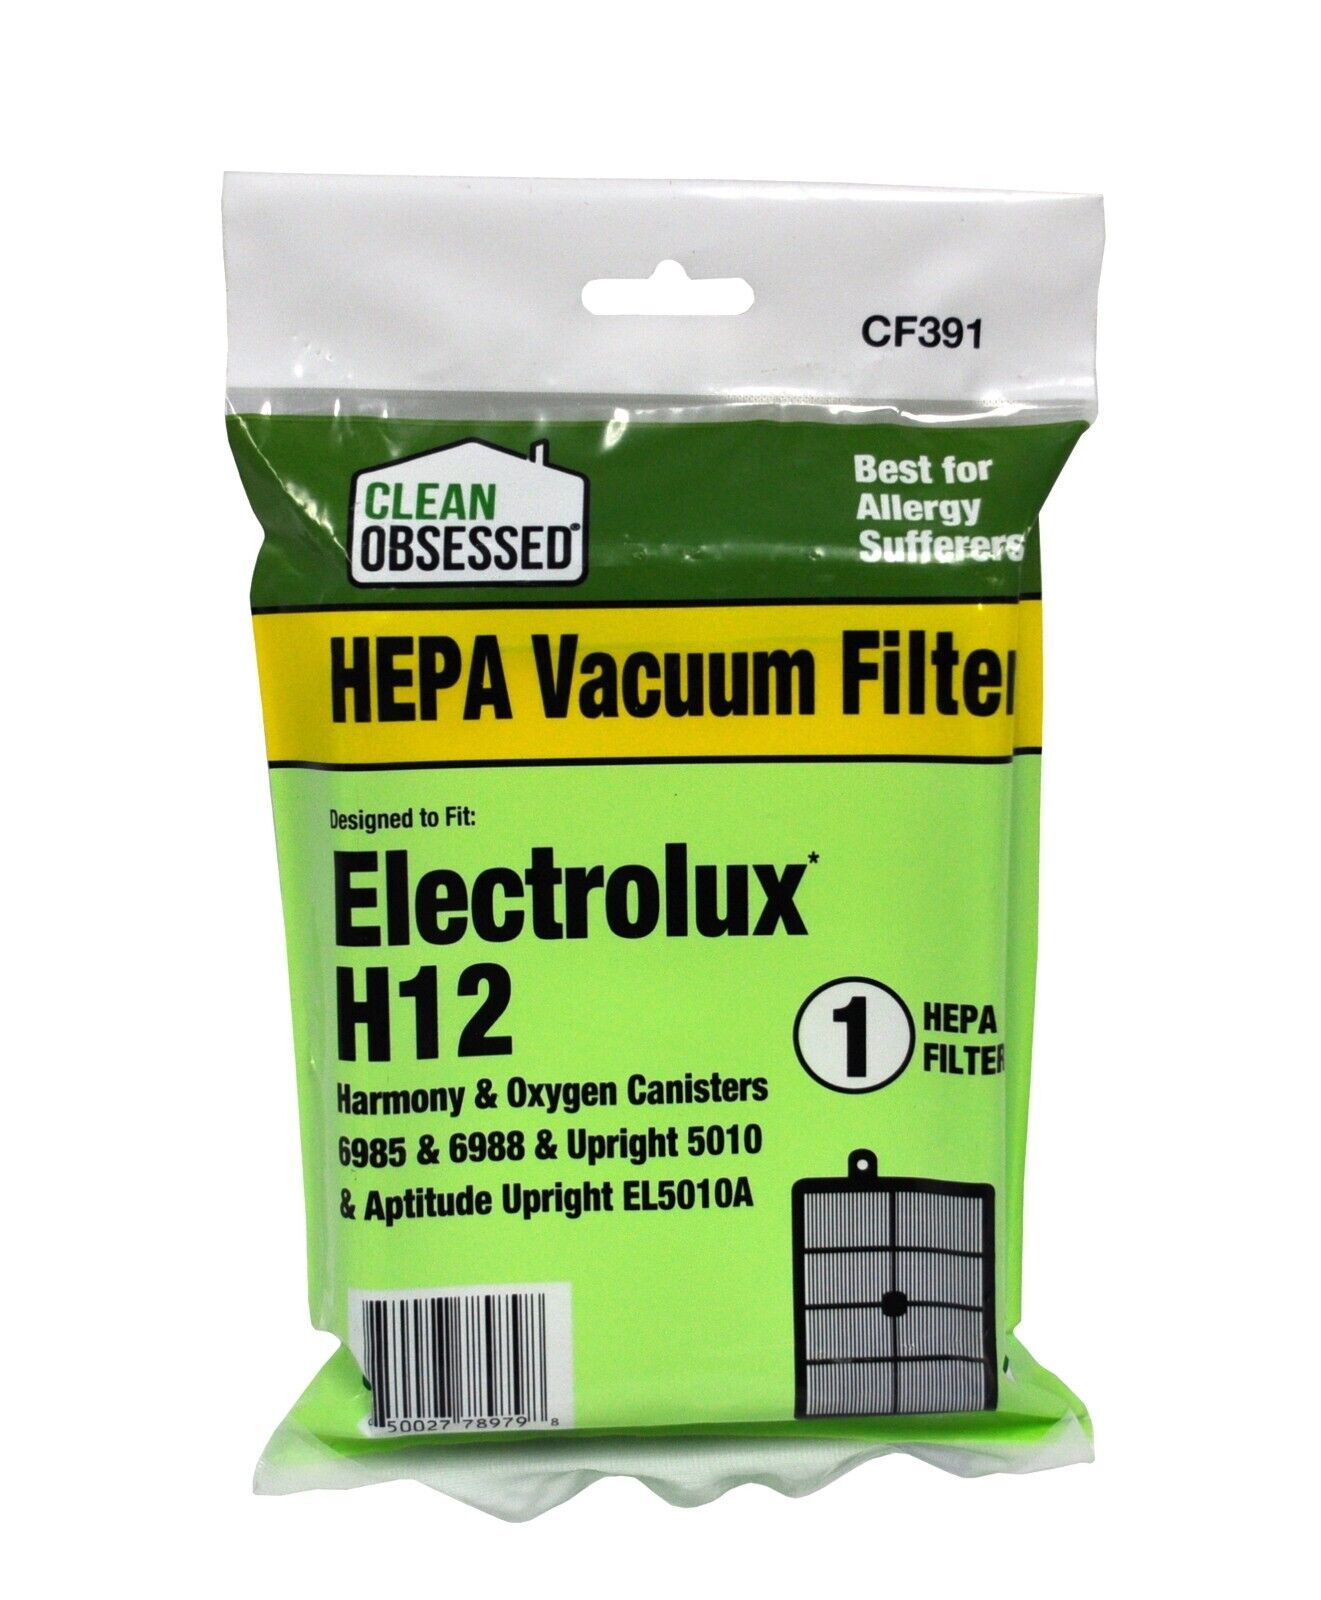 Clean Obsessed HEPA Vacuum Filter Designed To Fit Electrolux H12 - $15.69